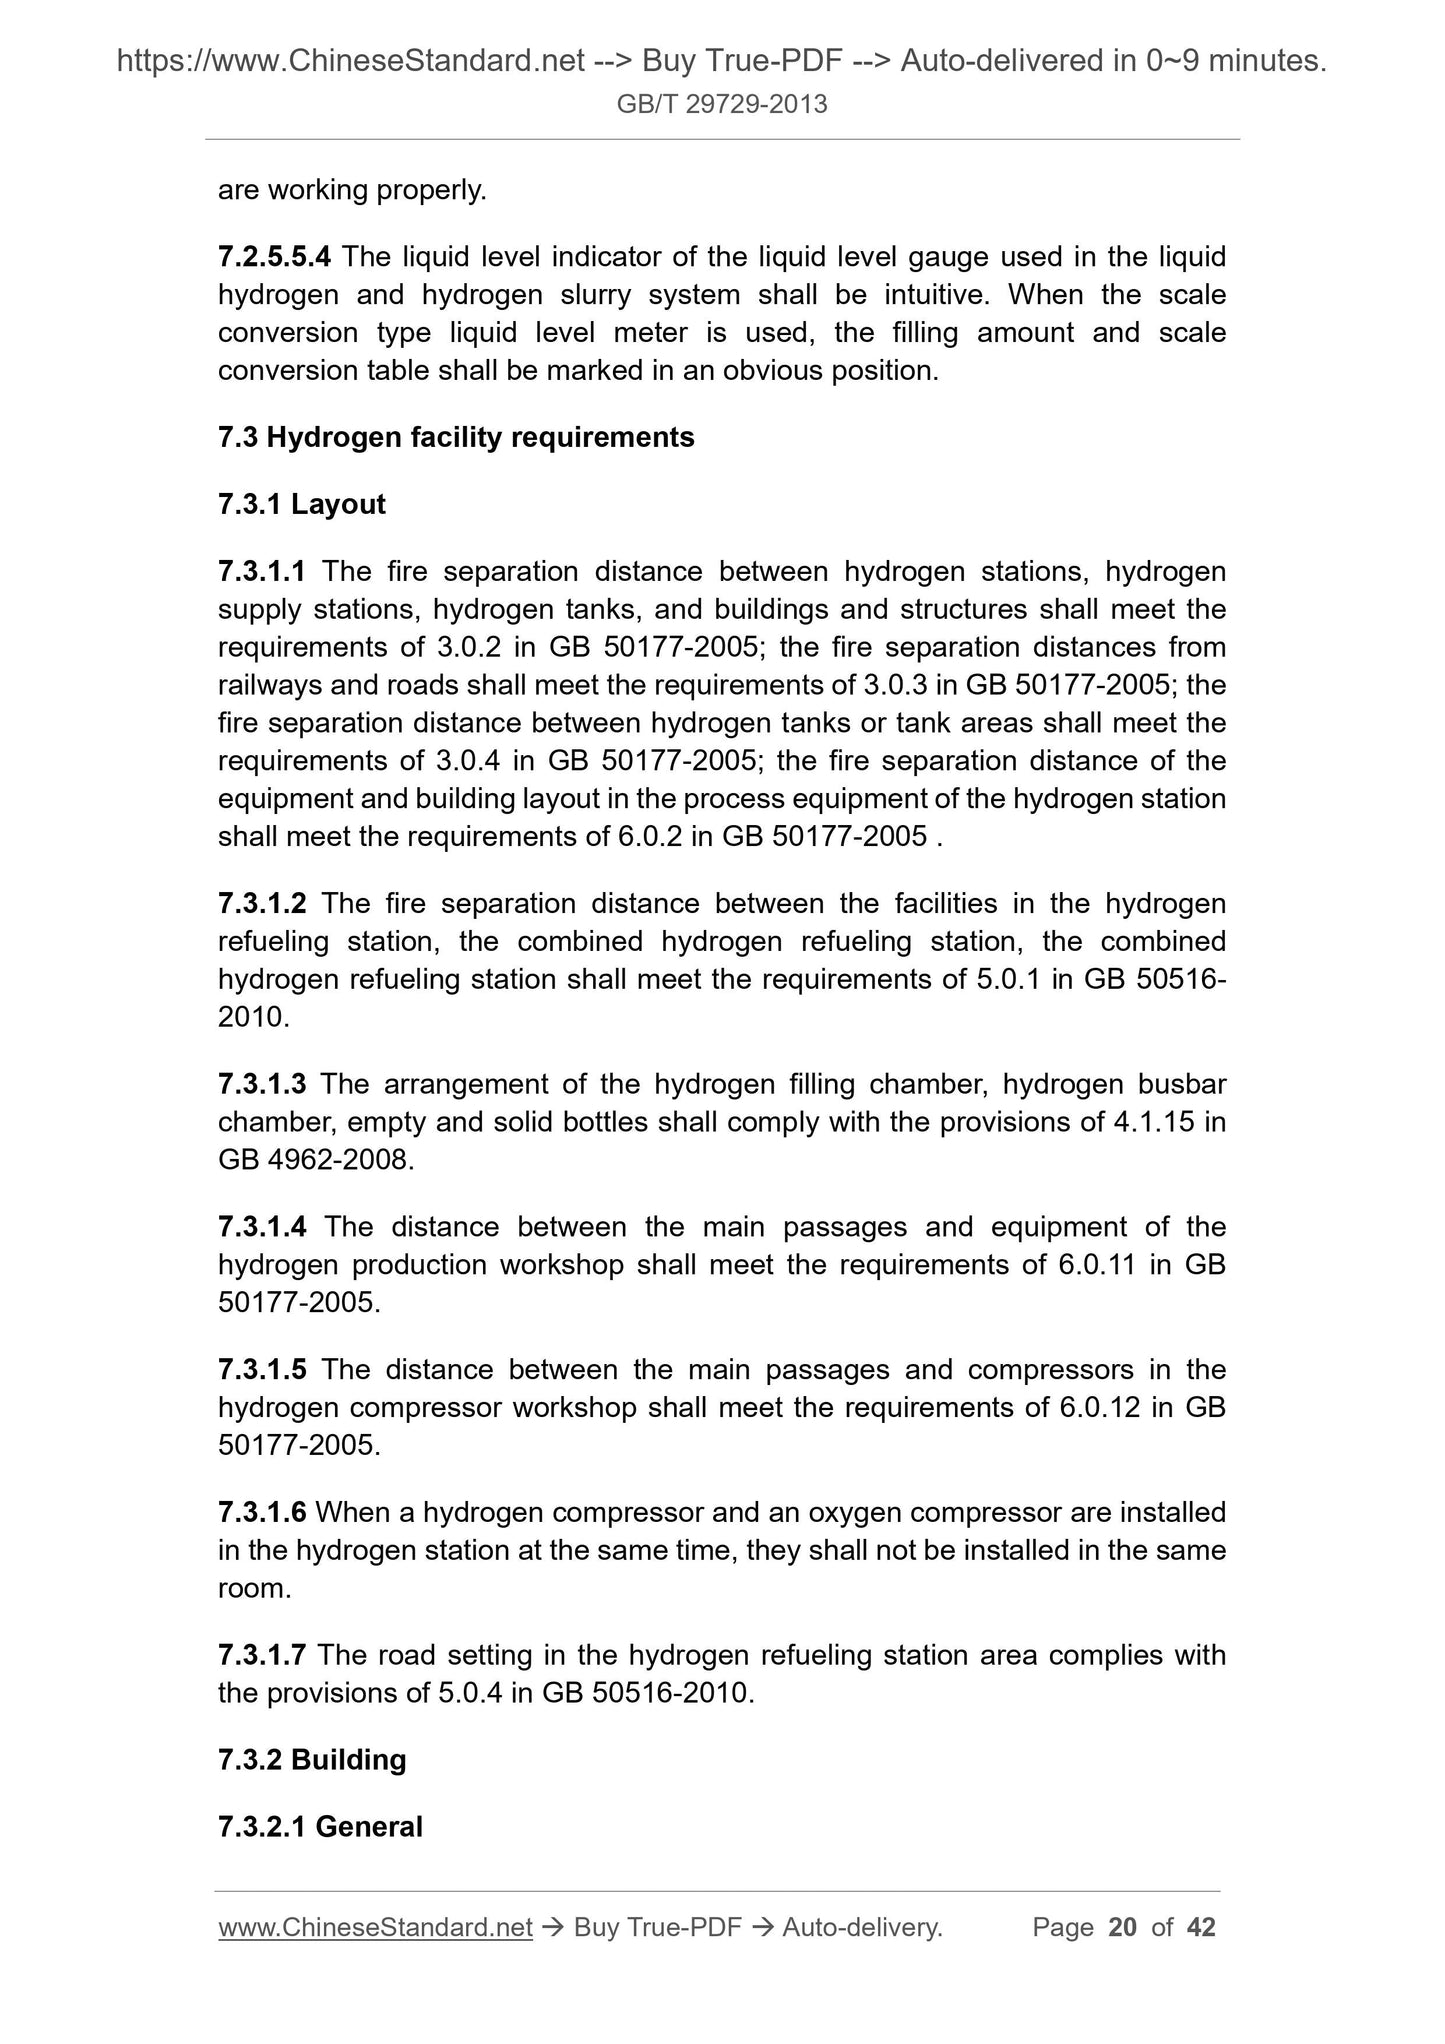 GB/T 29729-2013 Page 11